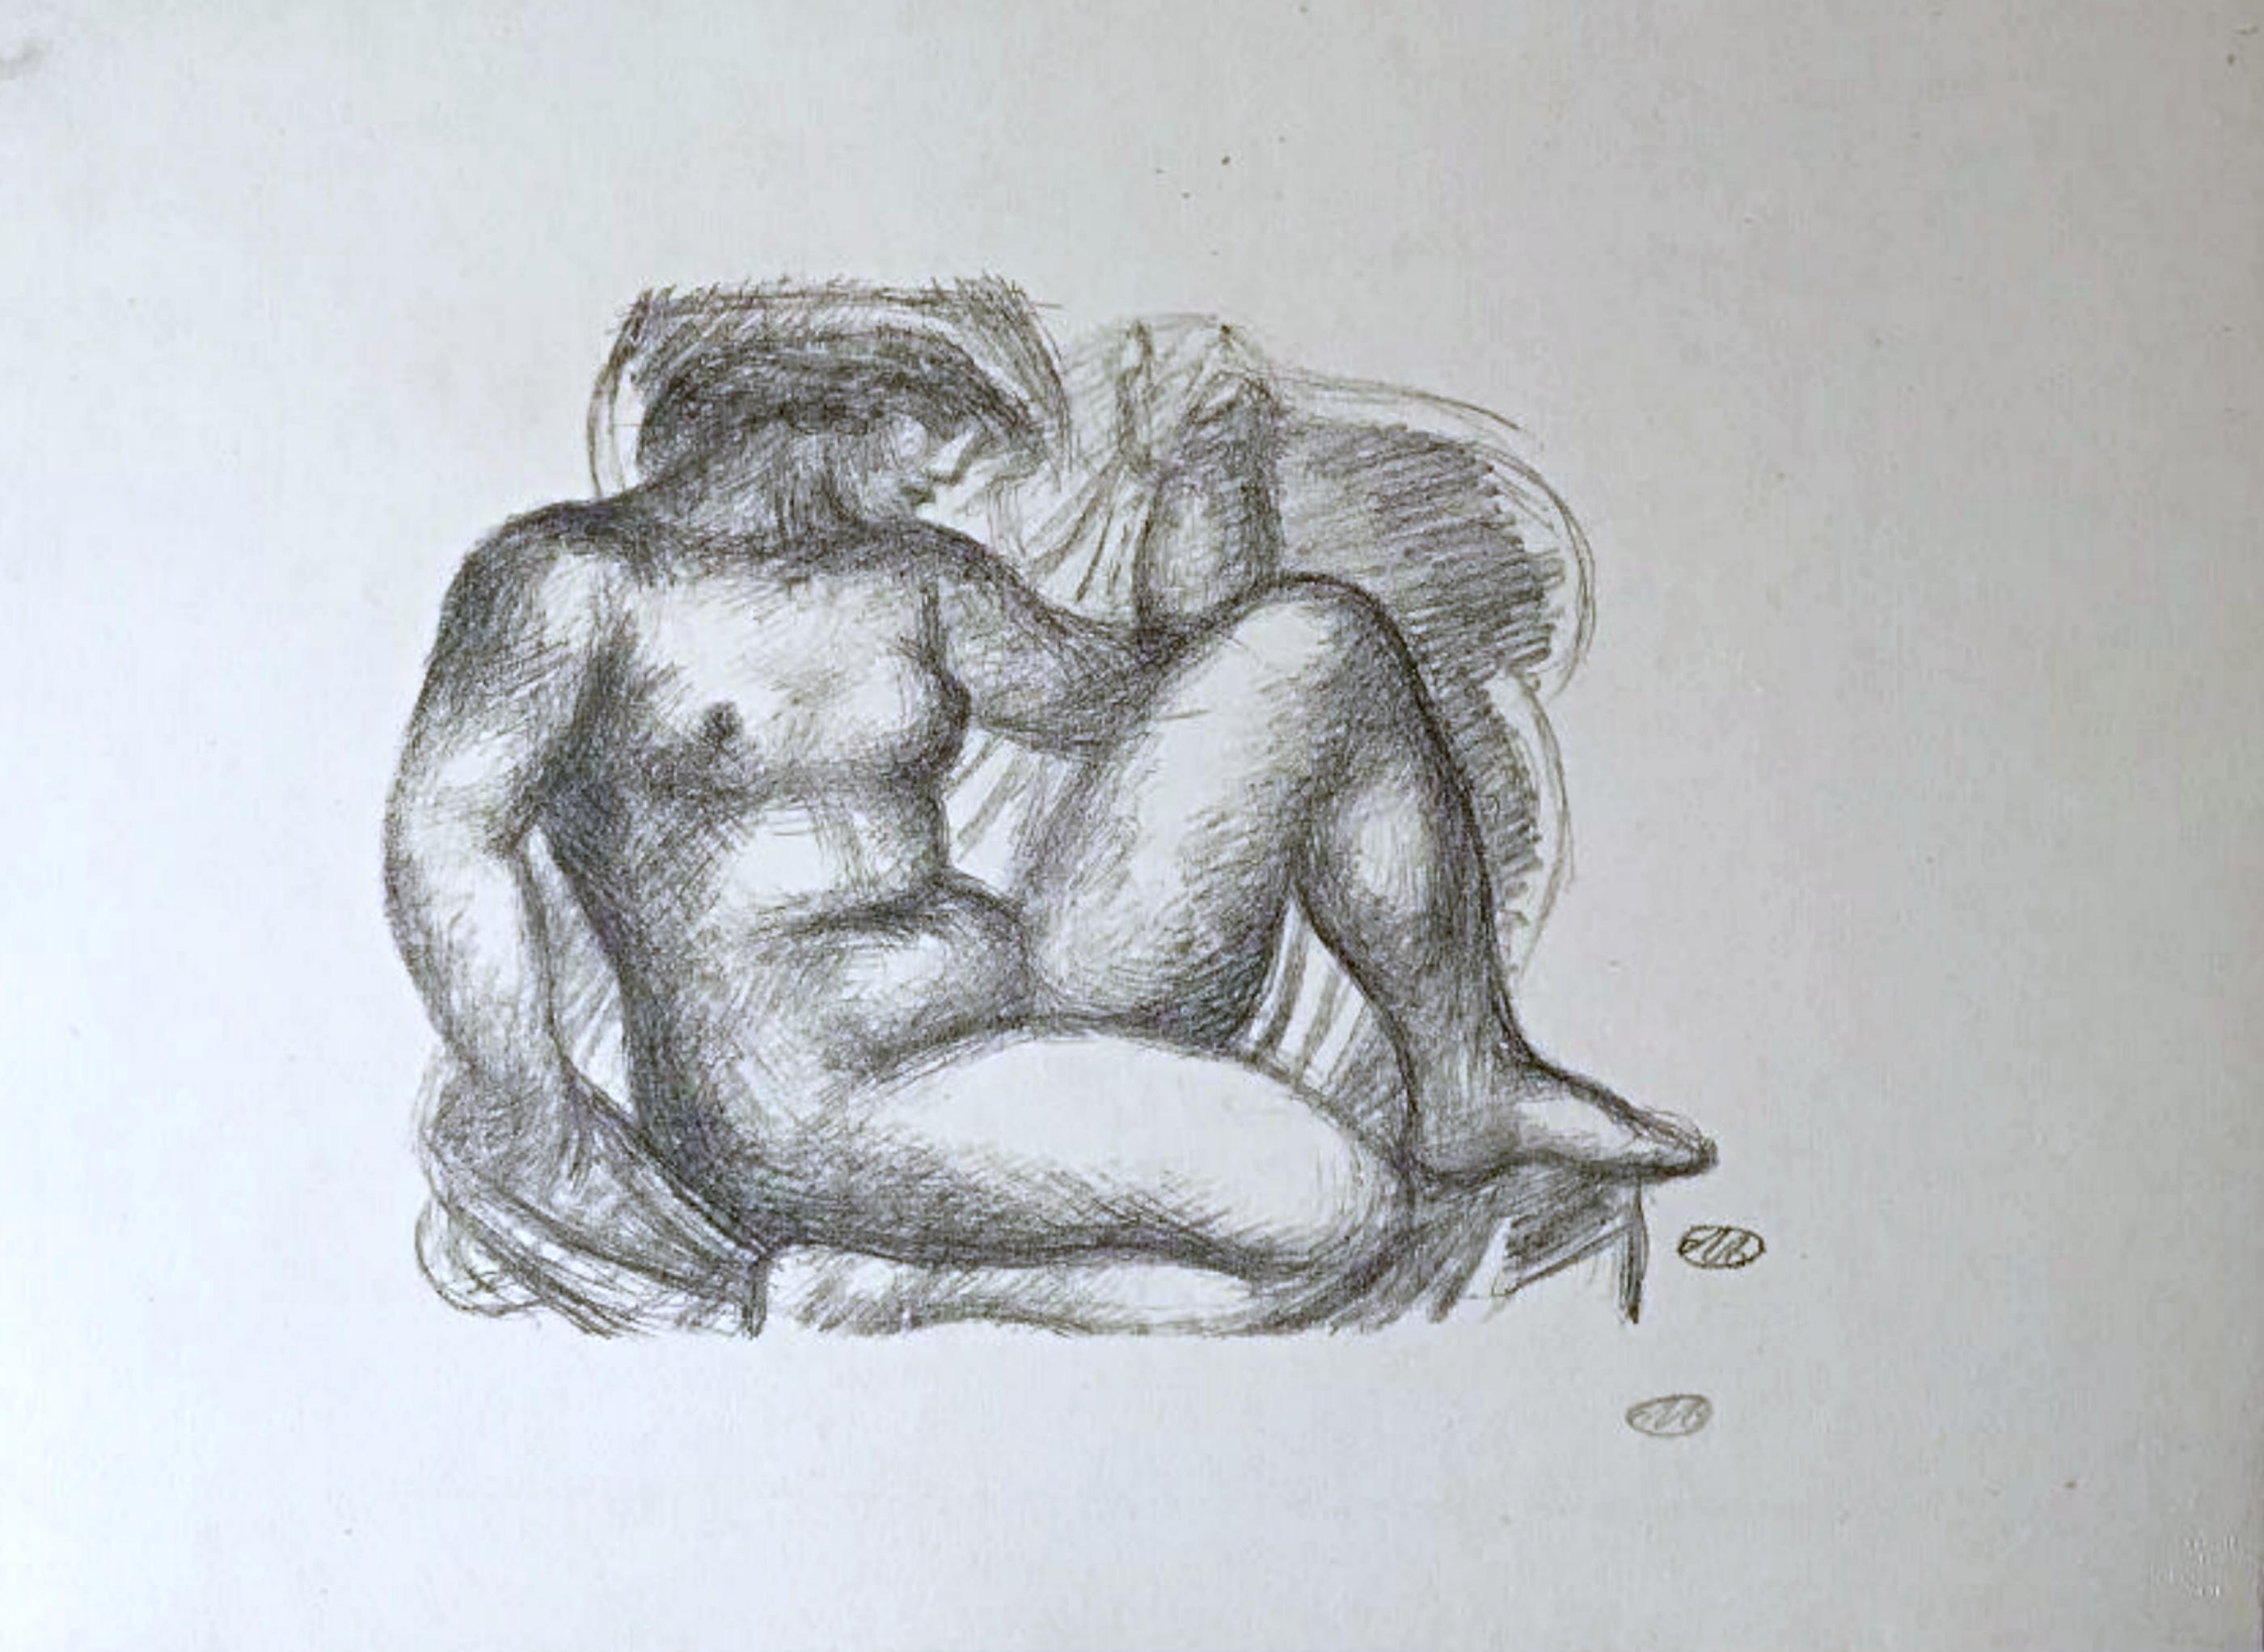 Aristide Maillol Figurative Print - Seated Nude (version 1) from the portfolio Maillol: Sculpture and Lithography)